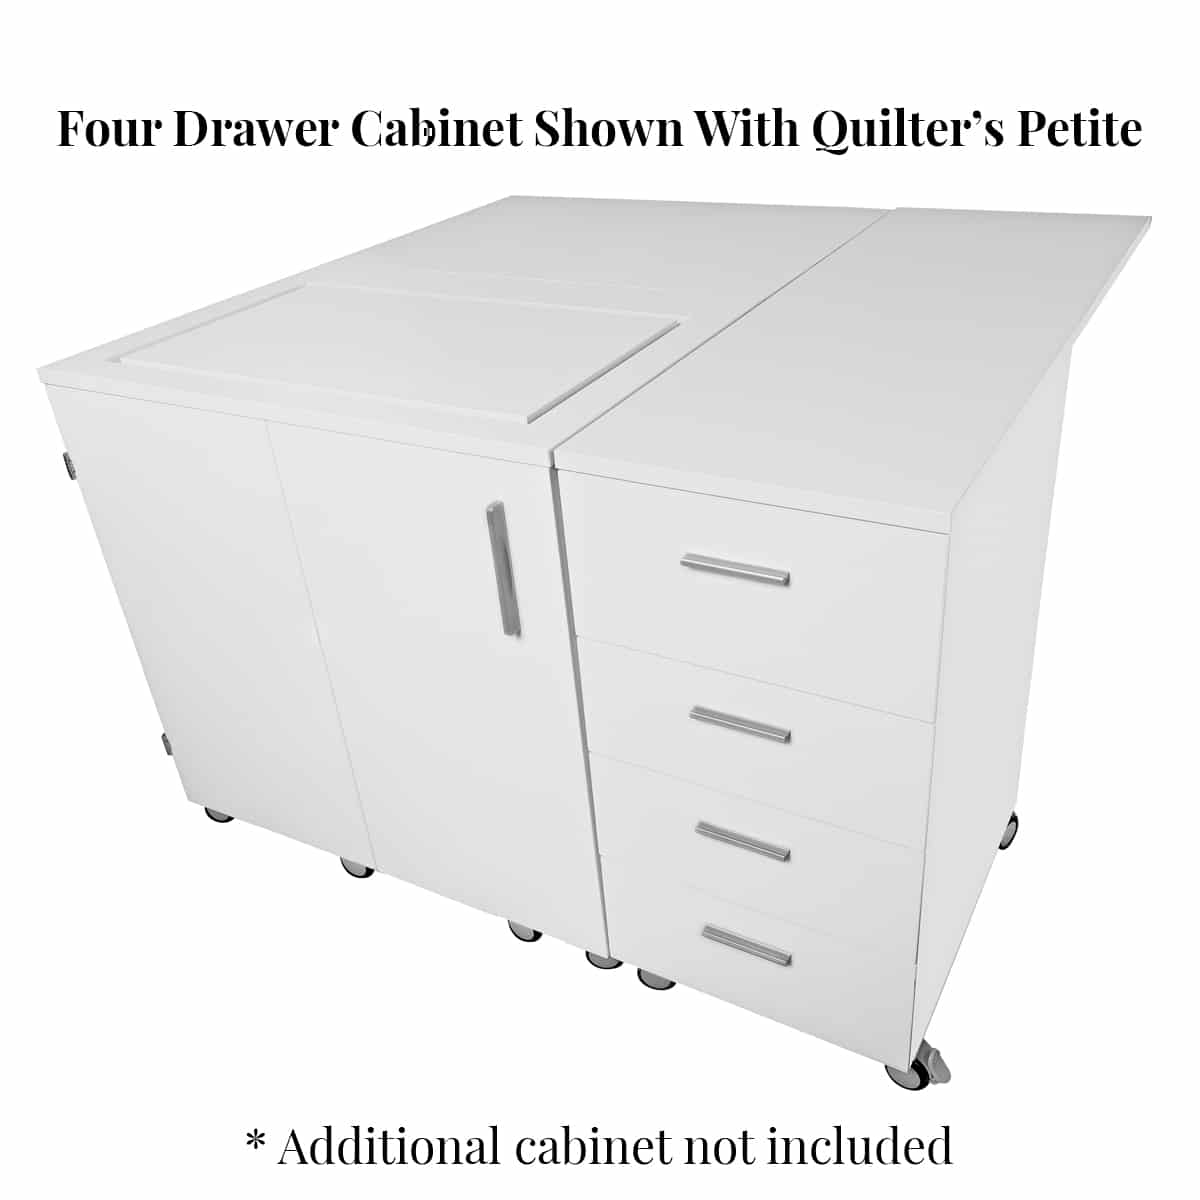 SewFine_FourDrawer-withQuilters-Petite_angled_square